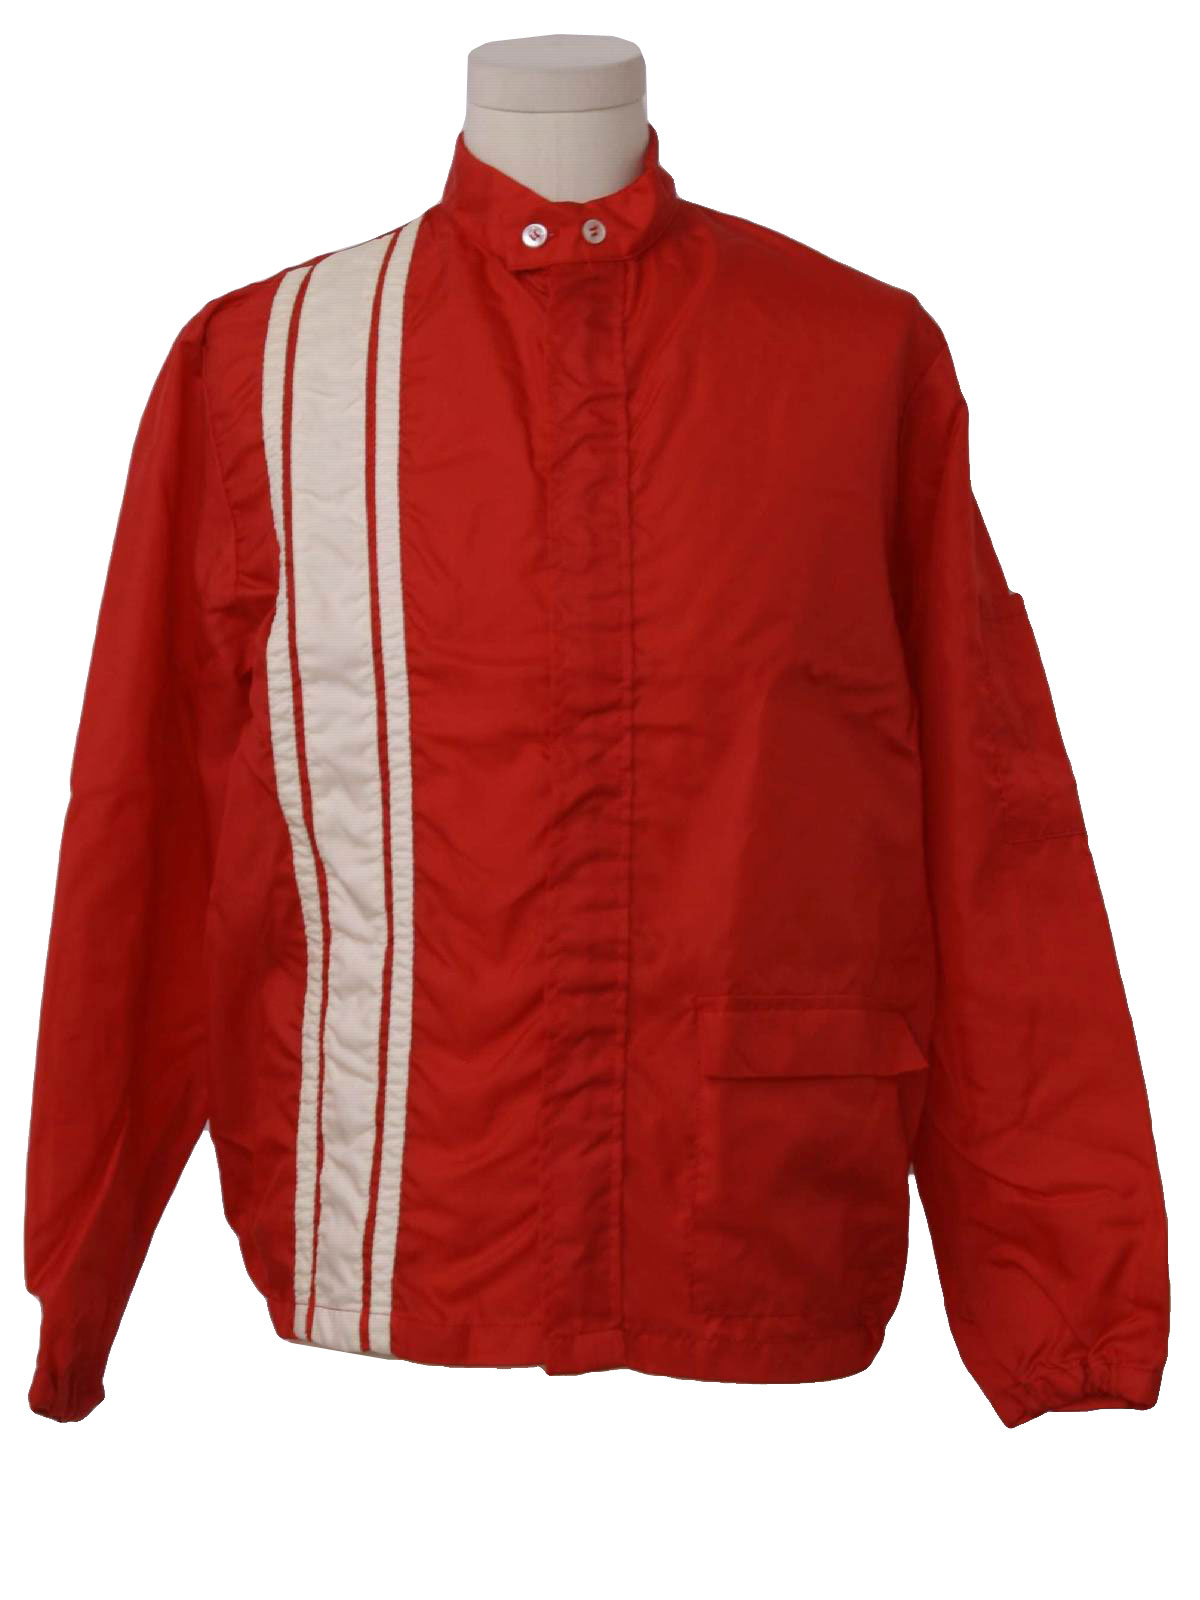 Vintage Swingster Sixties Jacket: 60s -Swingster- Mens red and white ...